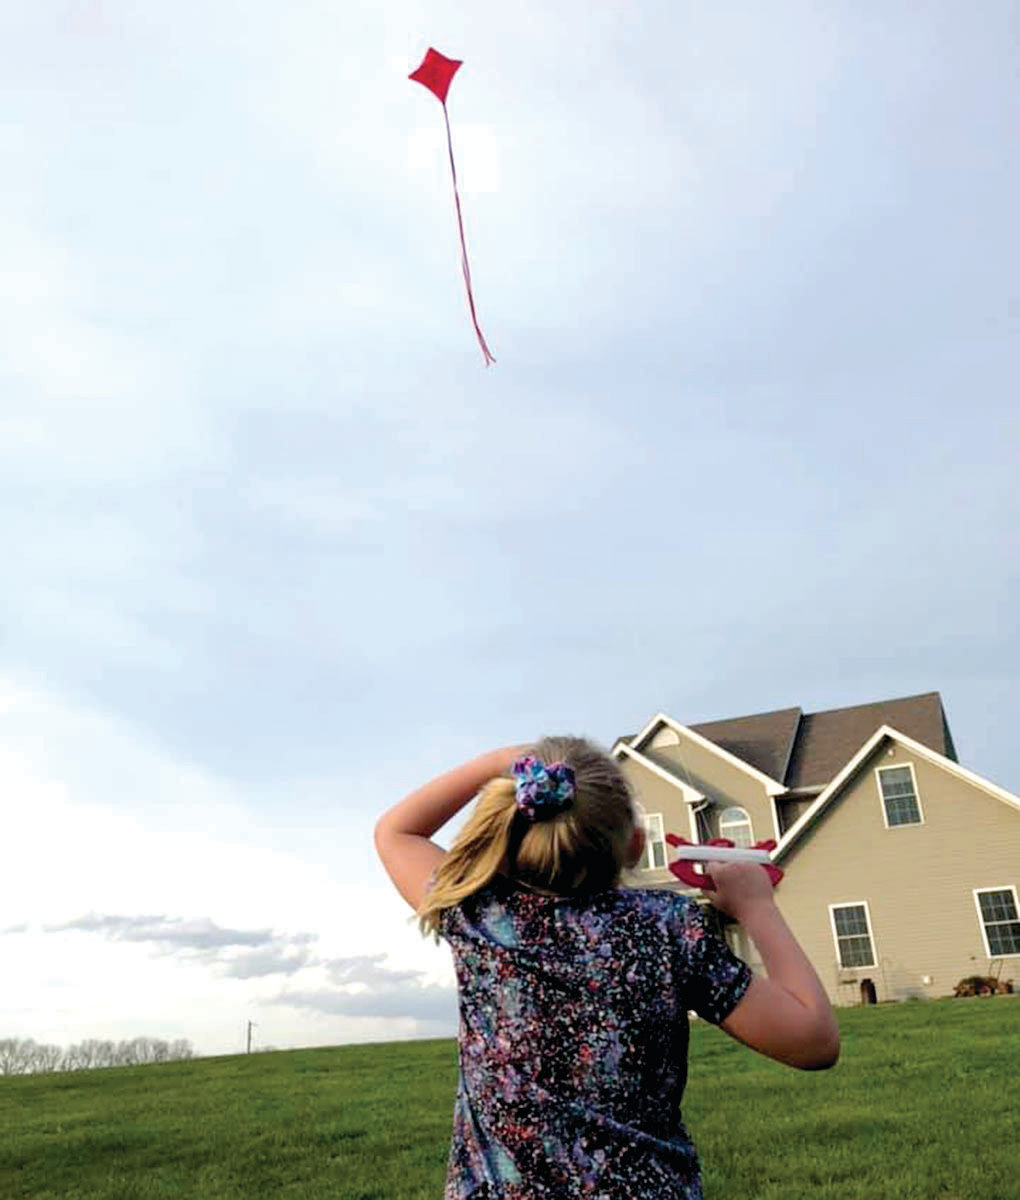 The Hall family in Linn has been taking advantage of the beautifully breezy weather and flying kites. Grace is shown here flying her kite.